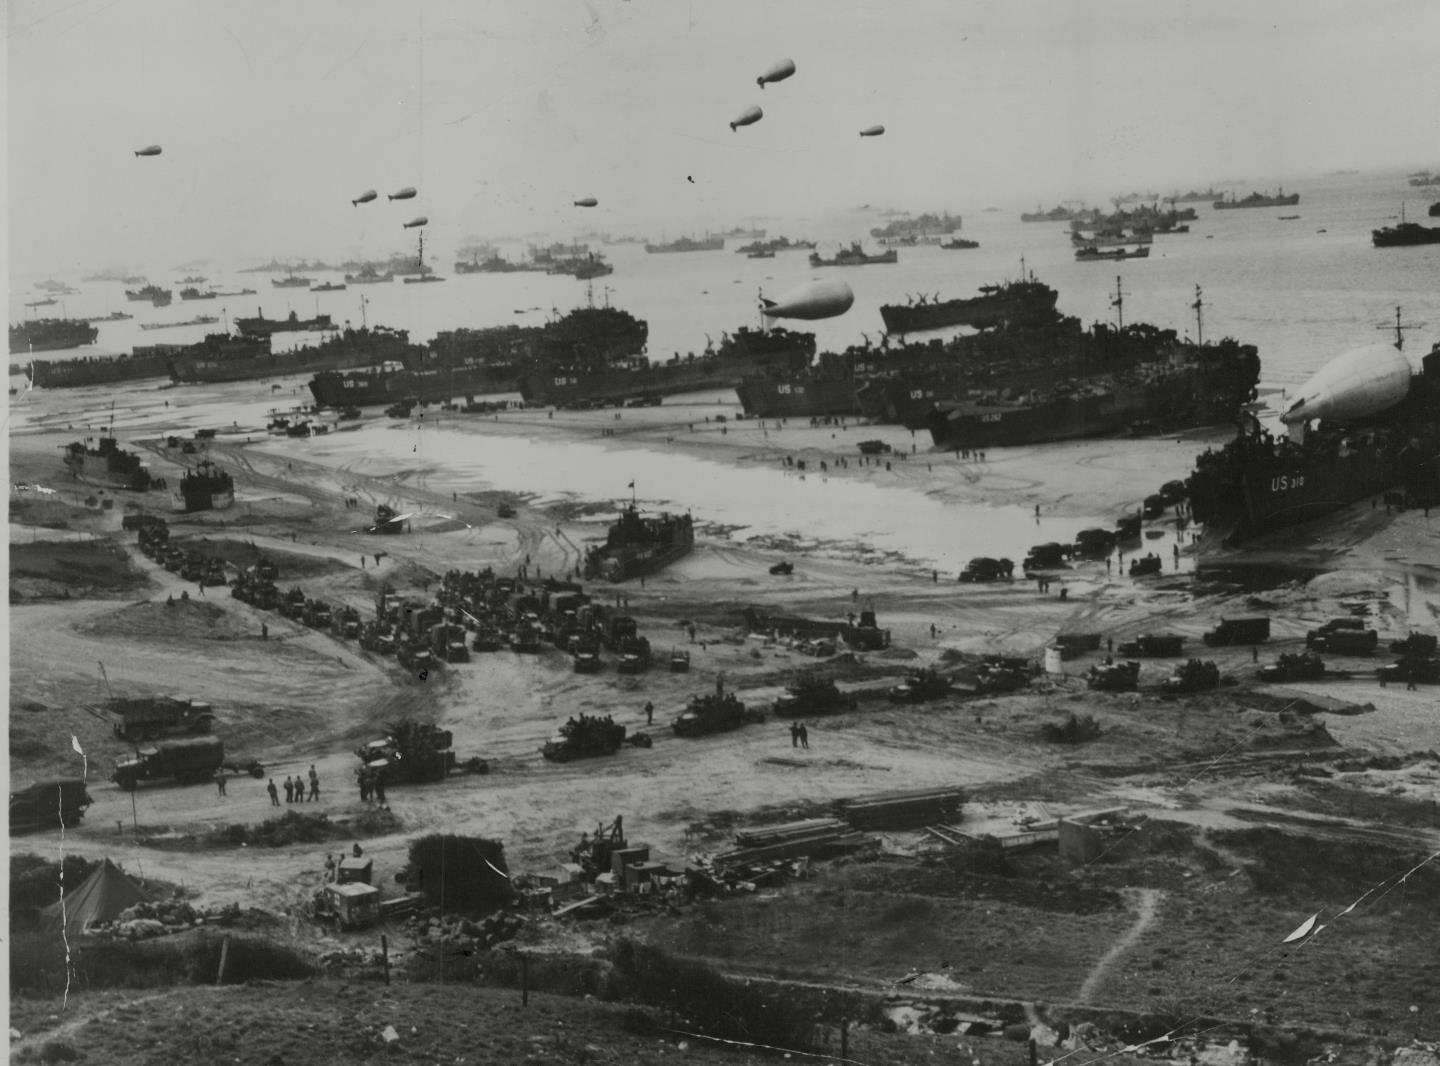 The Allied invasion of northern France, on D-Day, was codenamed Operation Overlord. The waters are packed with shipping as reinforcements and supplies are funnelled ashore for the conquest of the Cherbourg peninsula. 